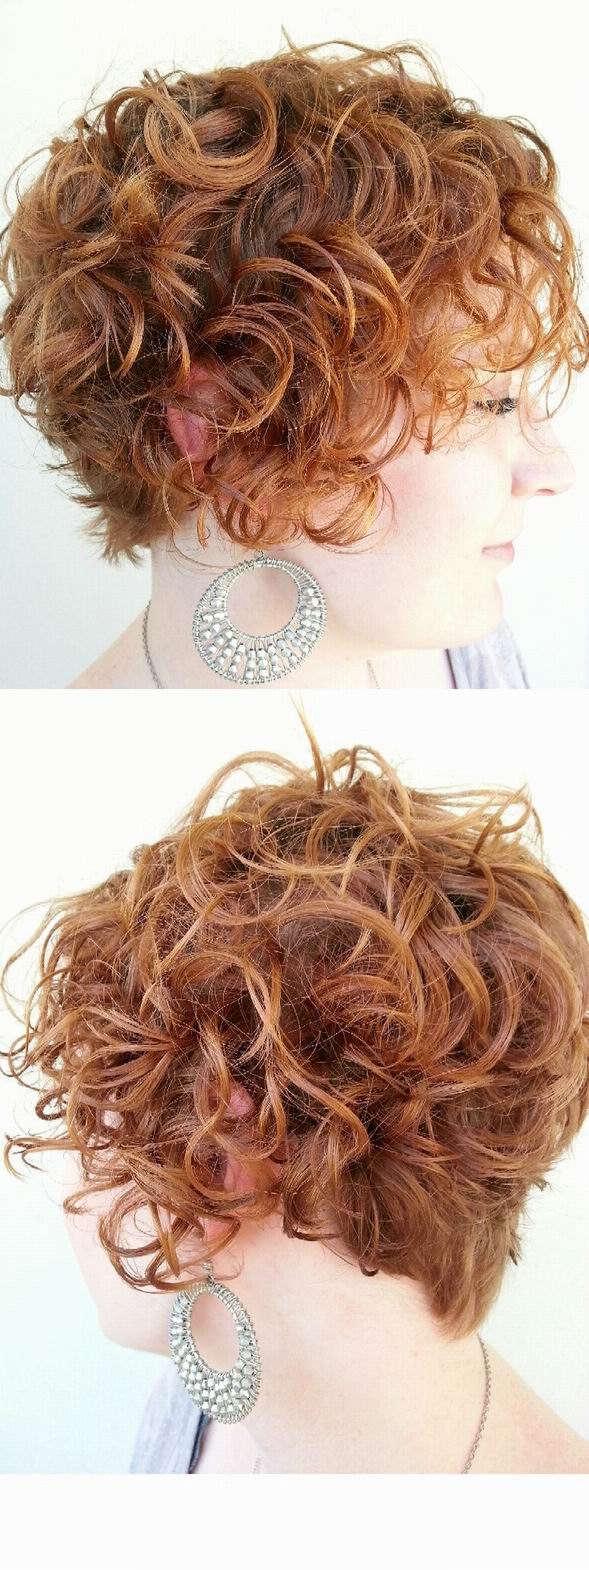 Best Quick Easy Curly Hairstyle for Short Hair